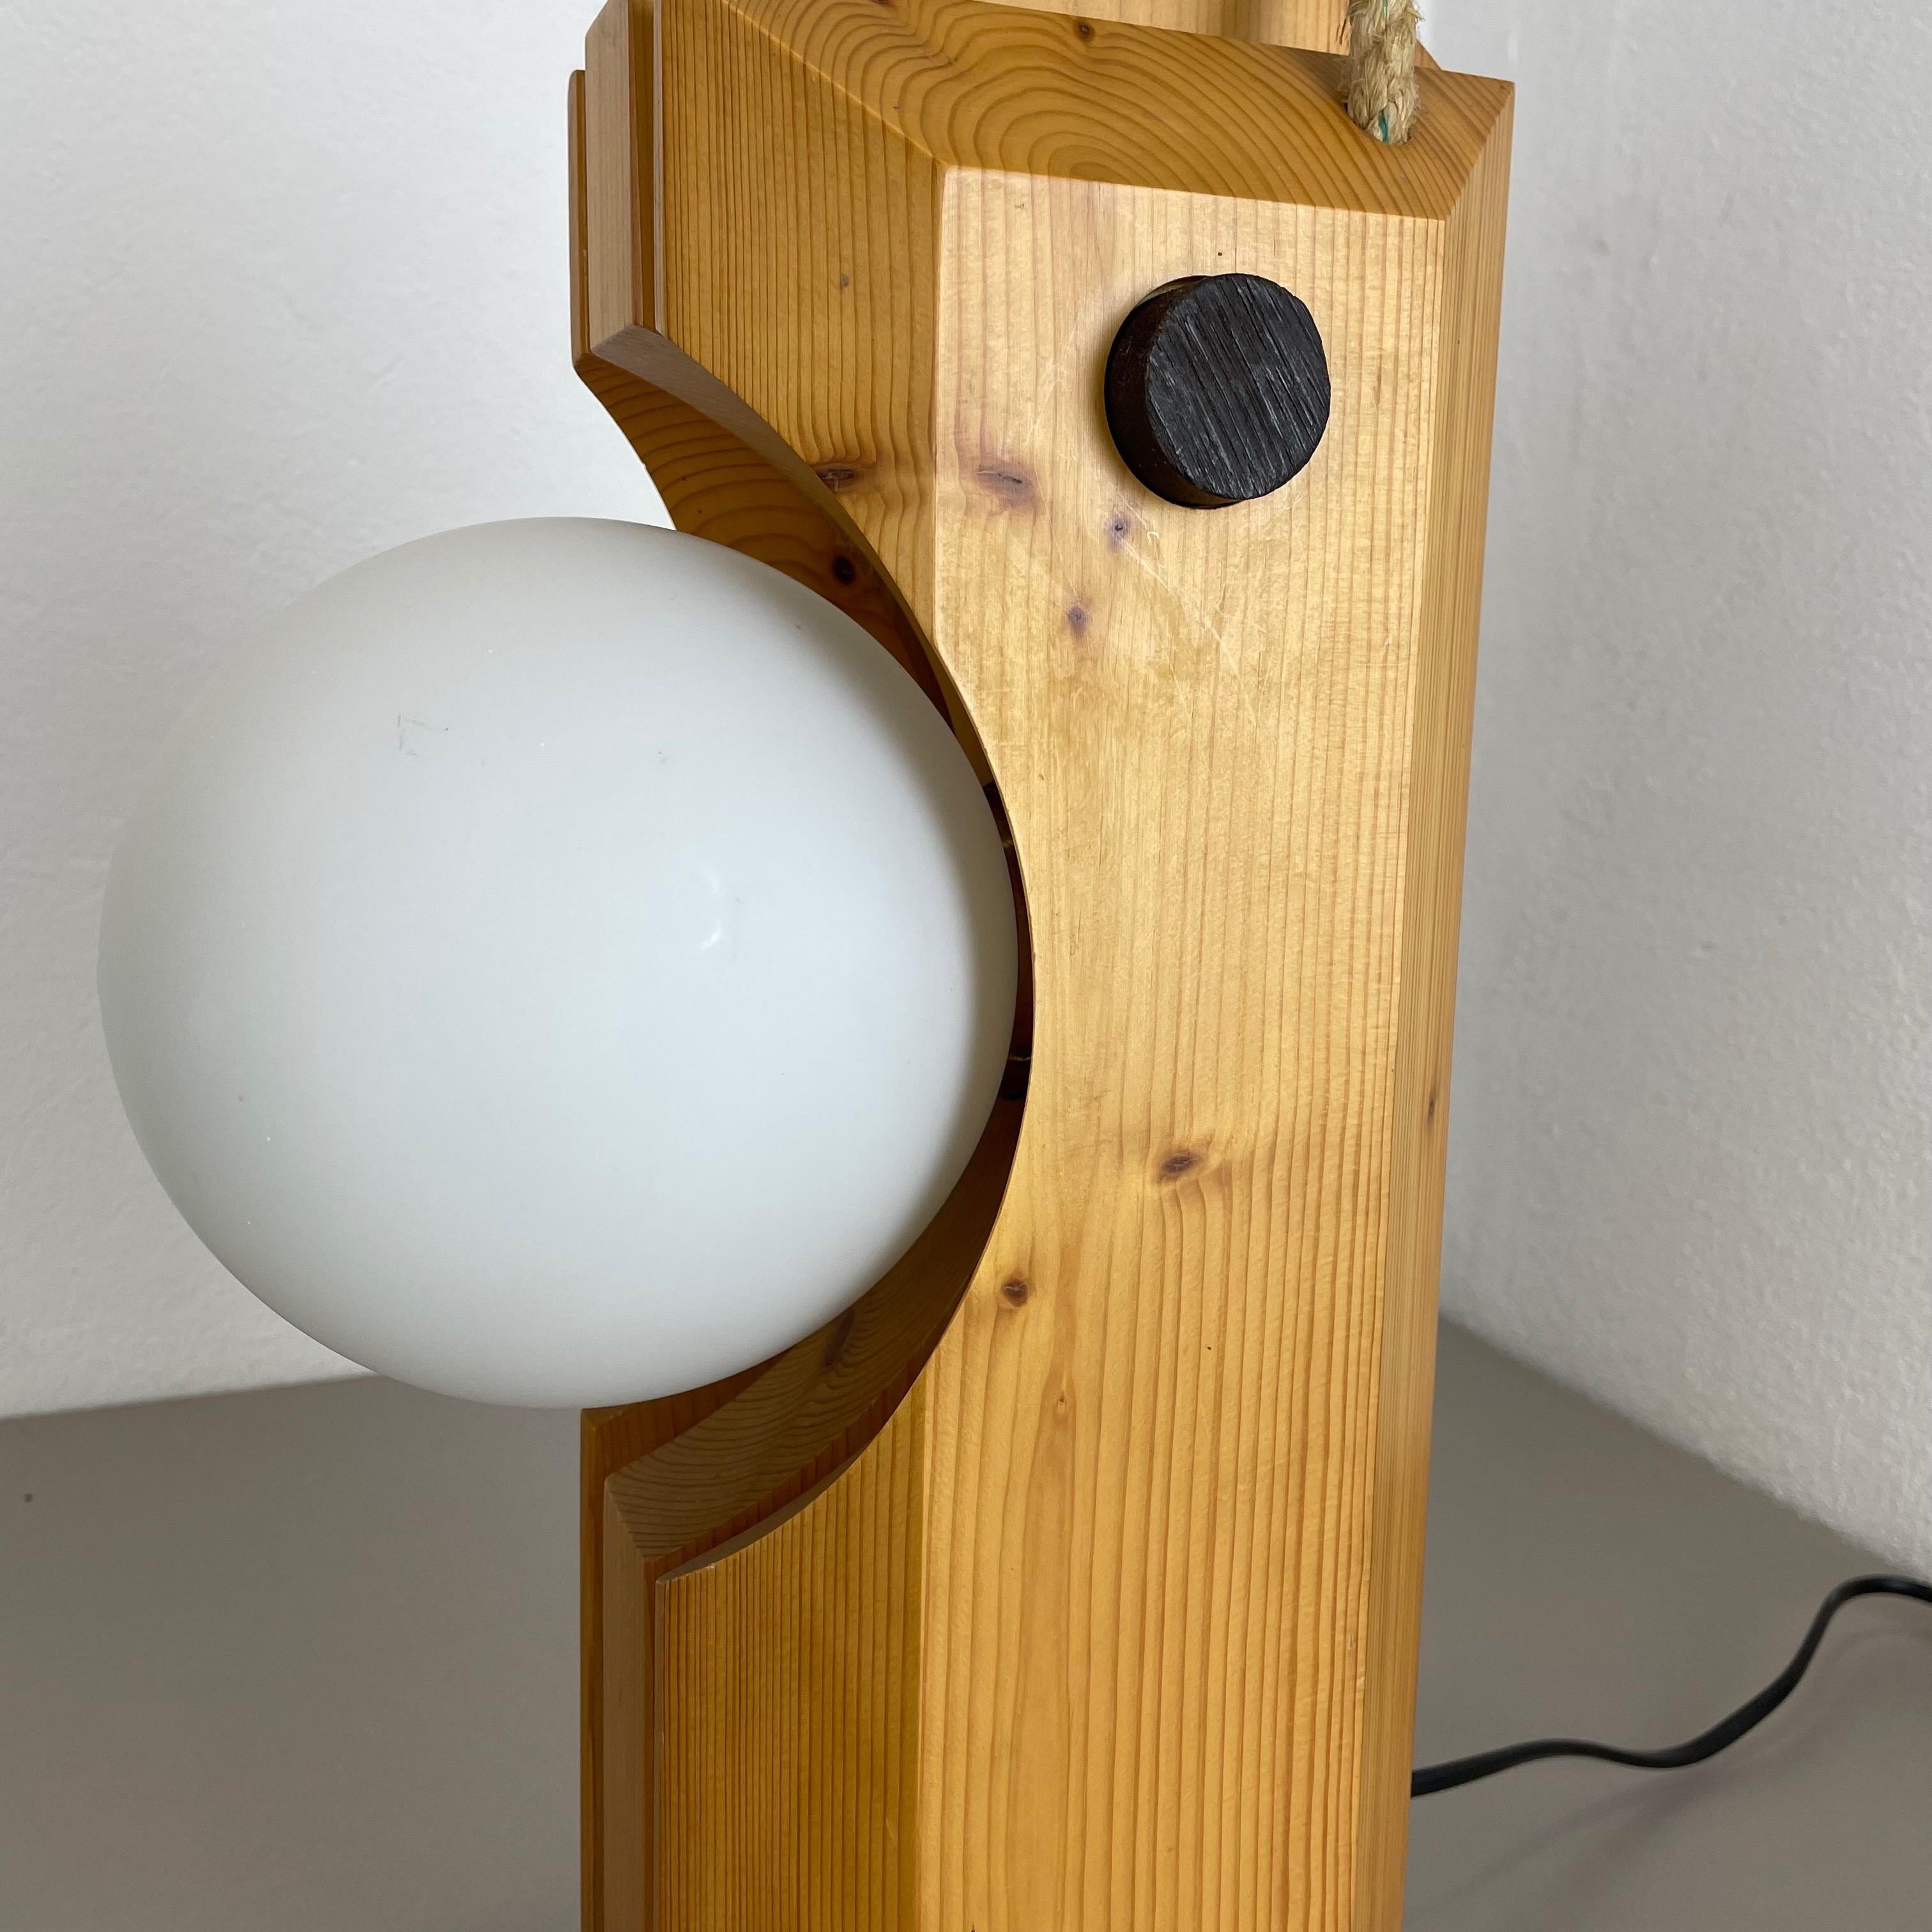 Large Organic Sculptural PINE Wooden Table Light by Temde Lights, Germany 1970s For Sale 6